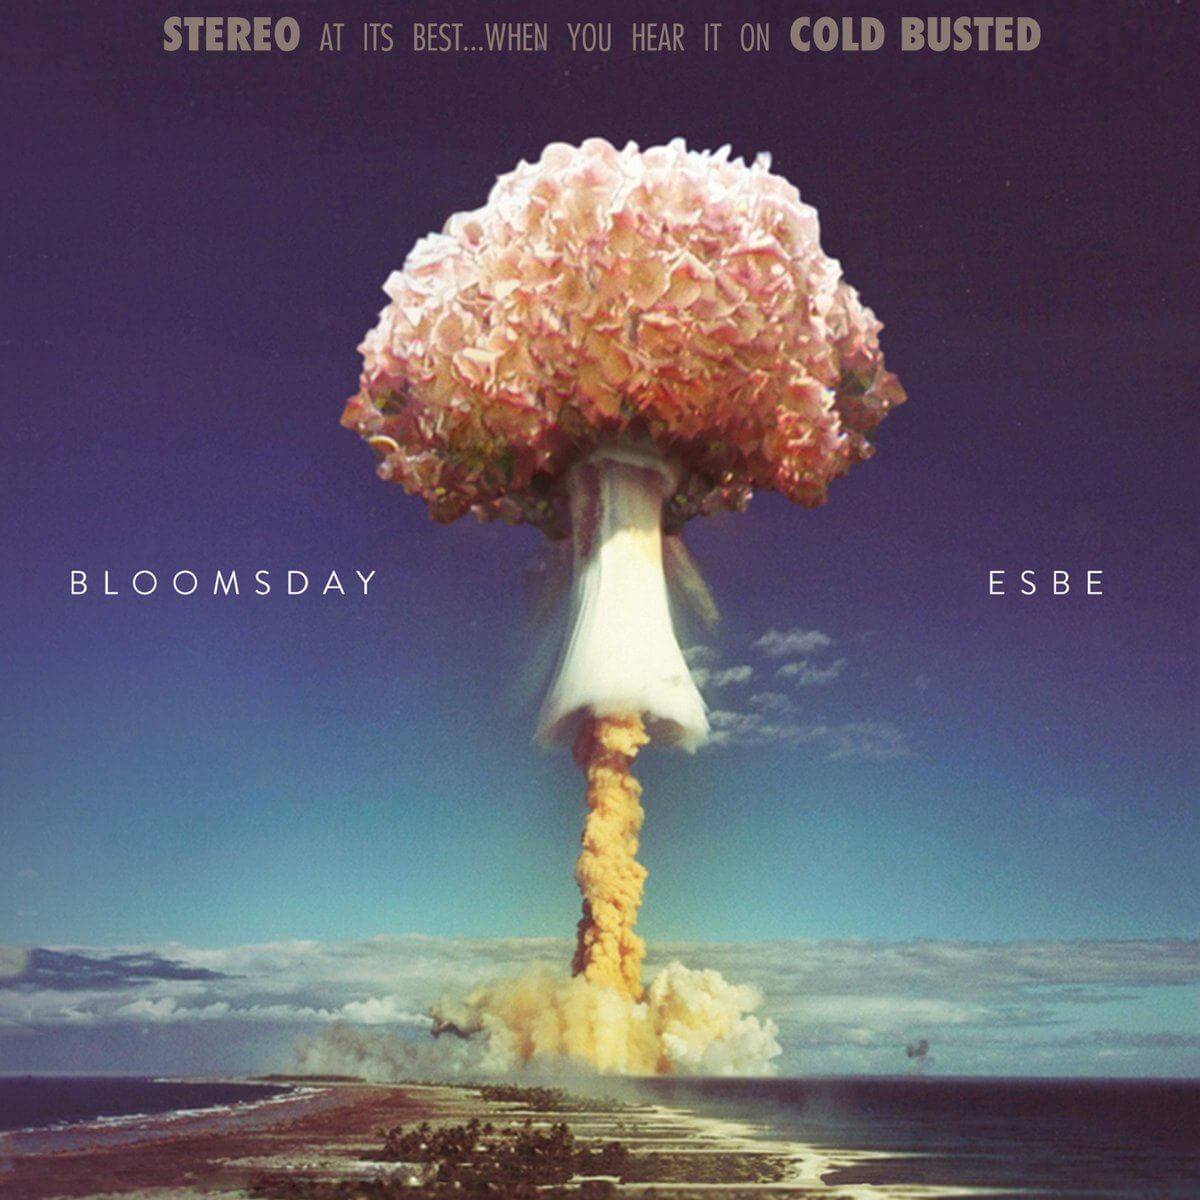 Esbe - Bloomsday - Limited Edition Compact Disc - Cold Busted